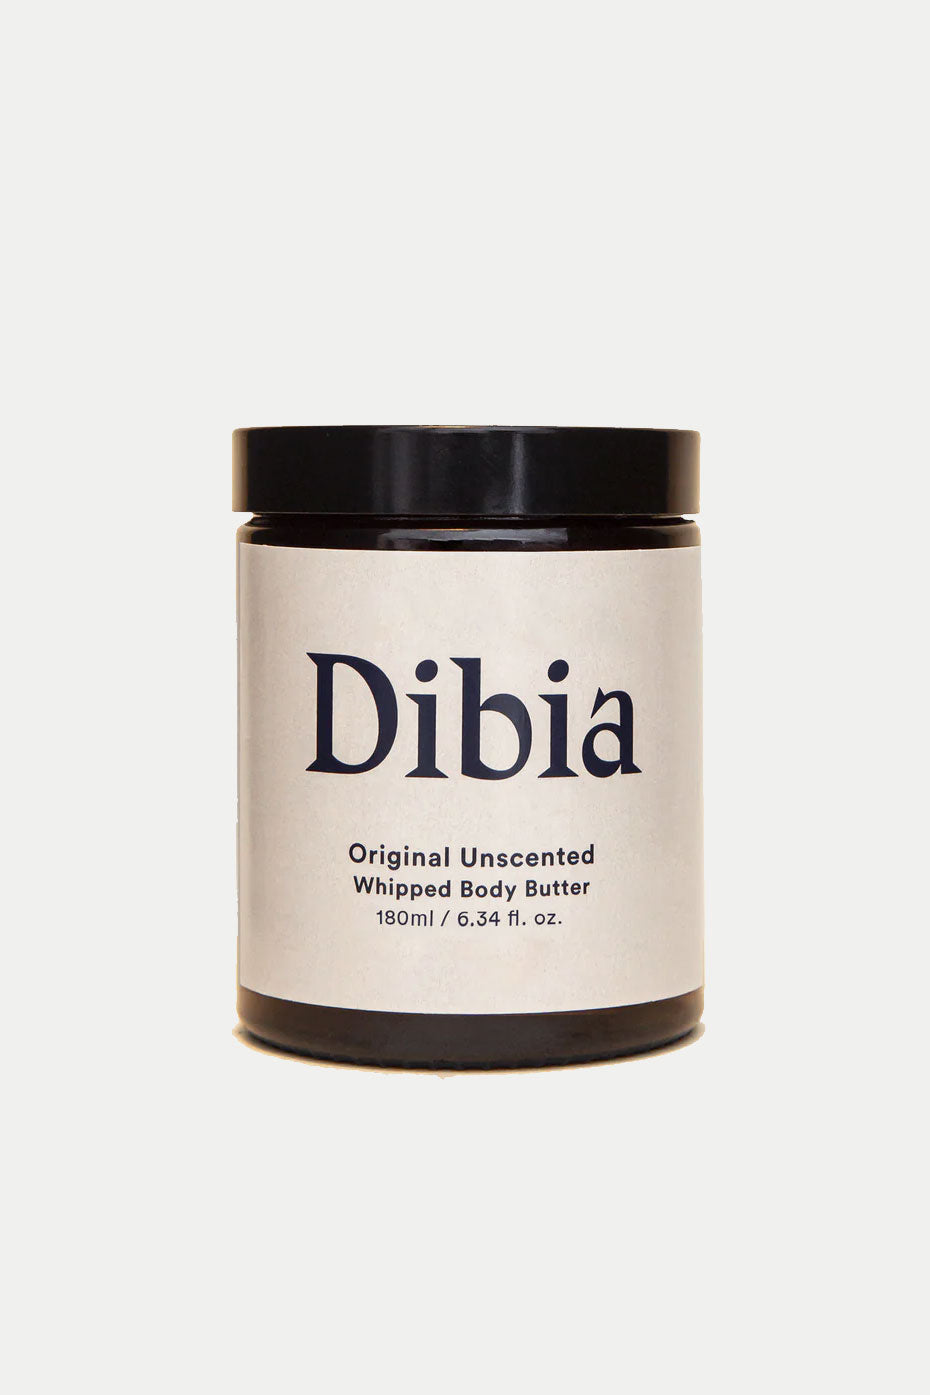 dibia-original-unscented-whipped-body-butter-180ml